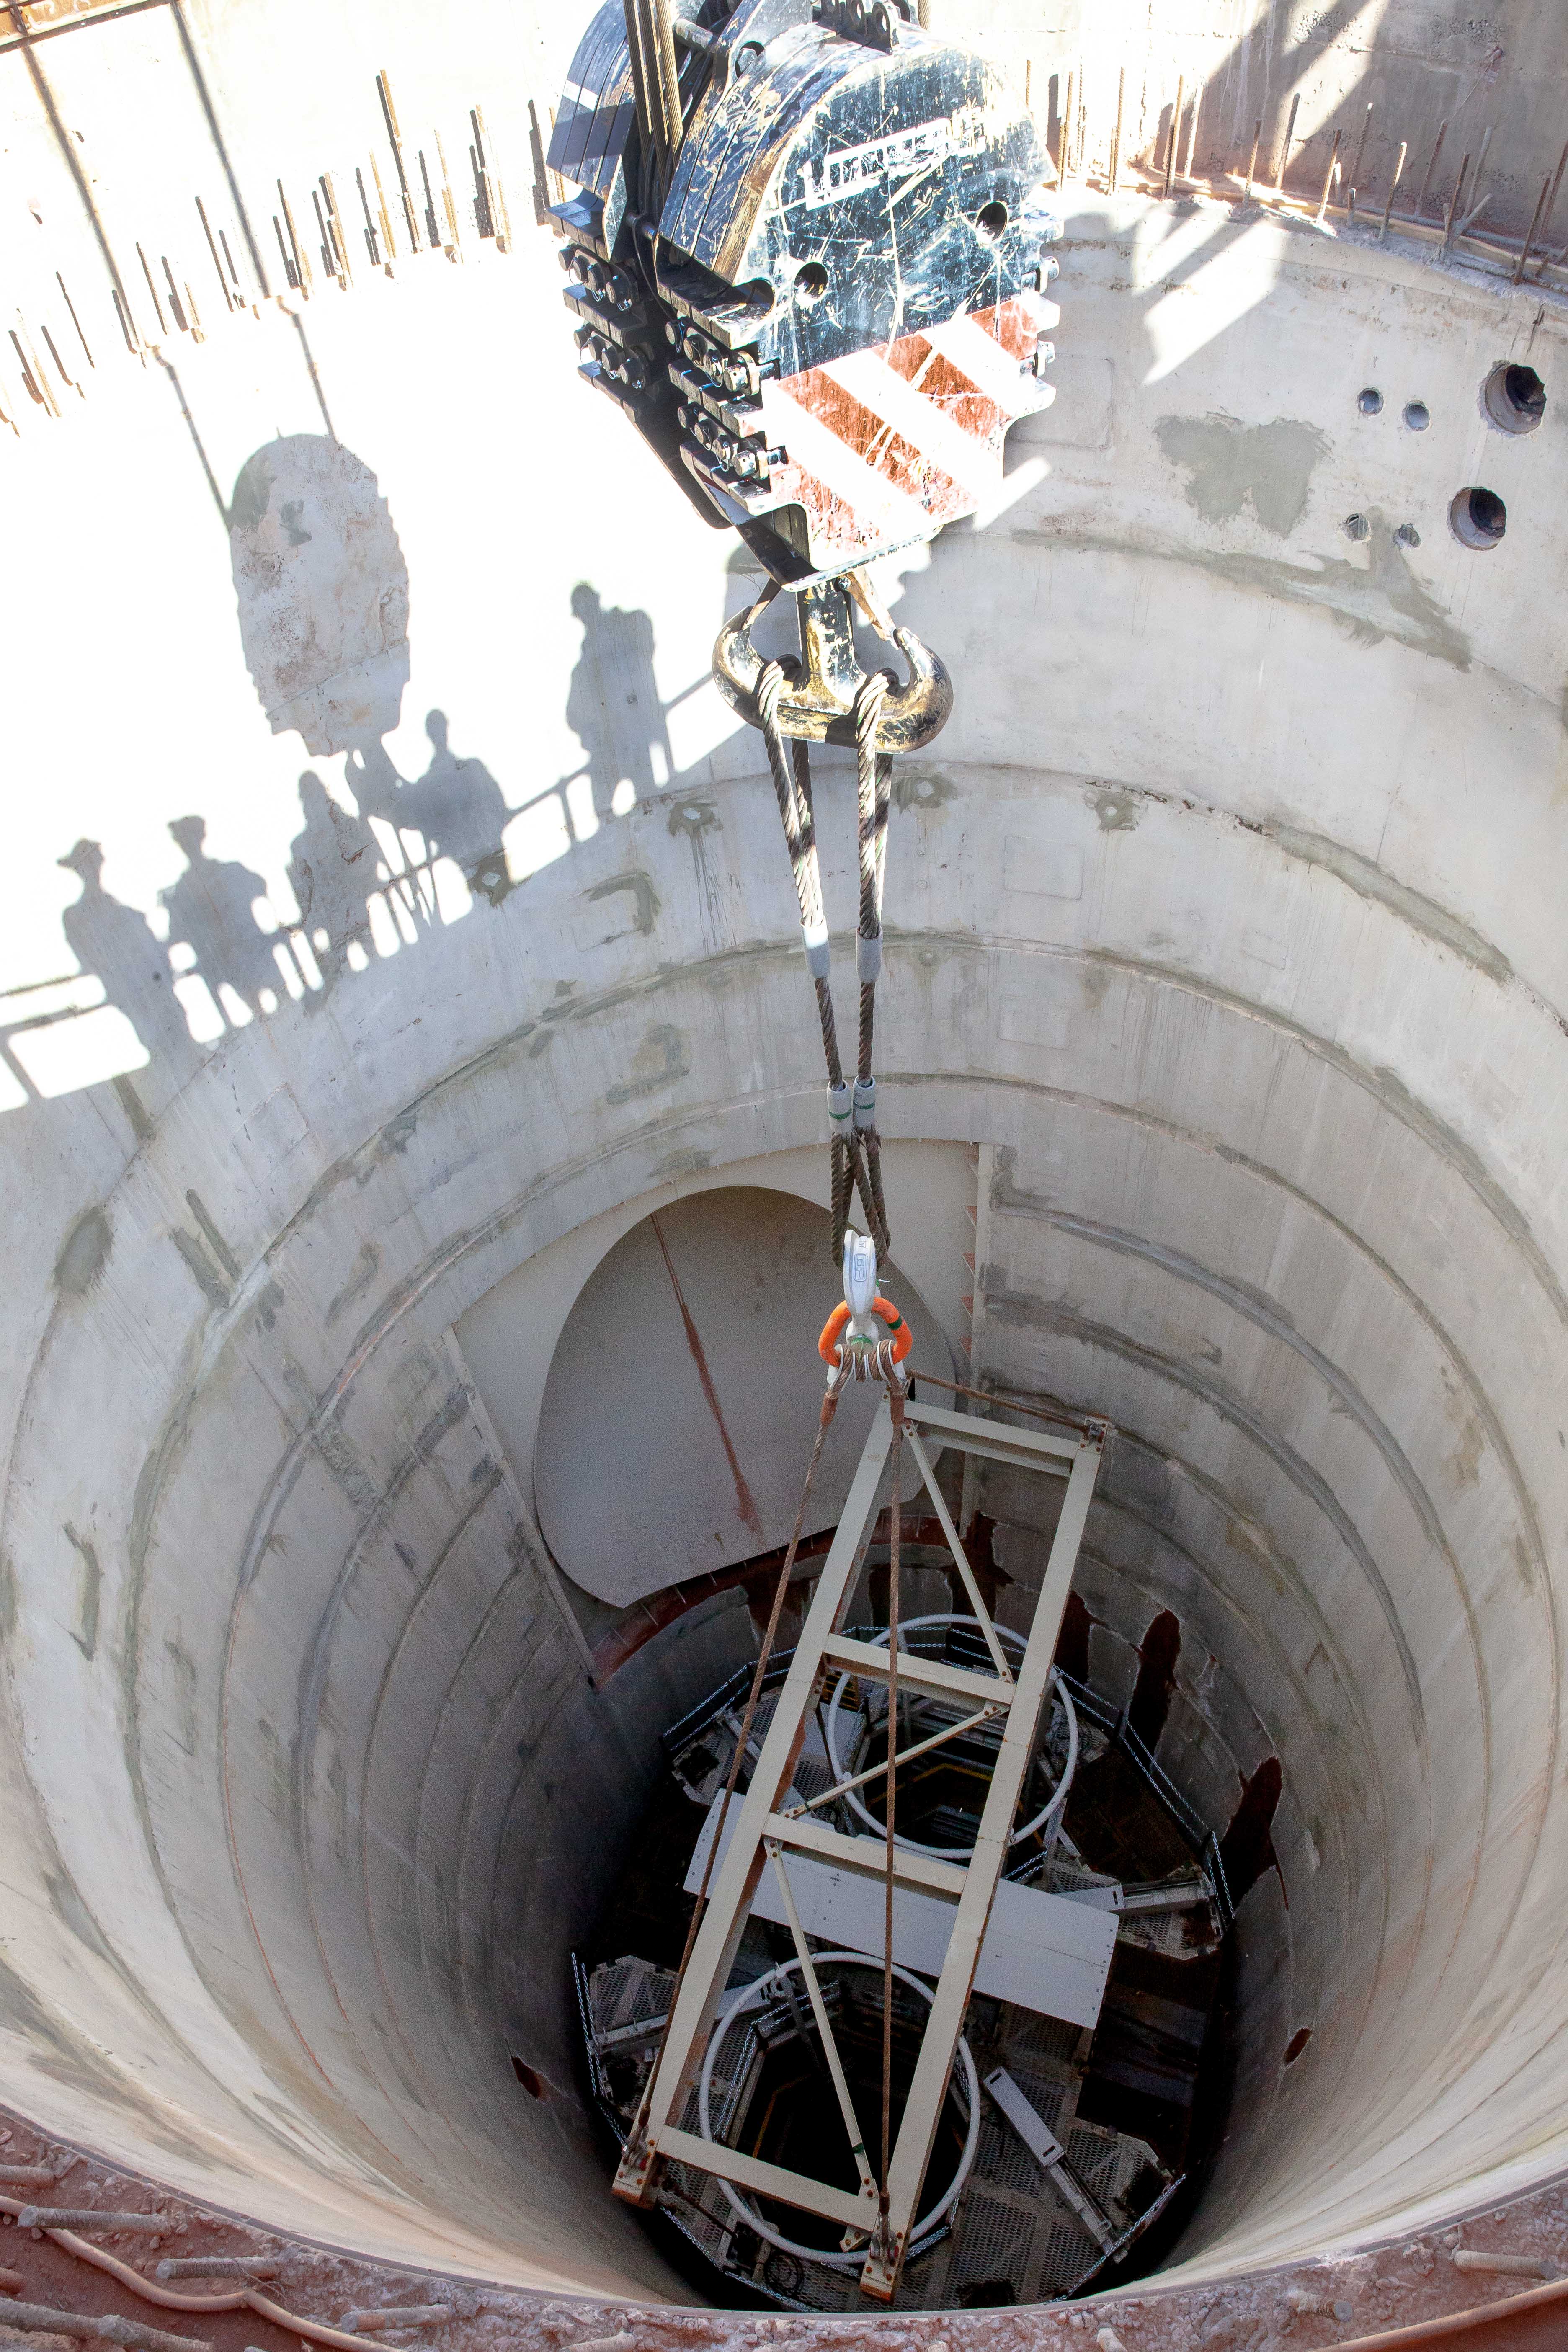 Image from above of the utility shaft